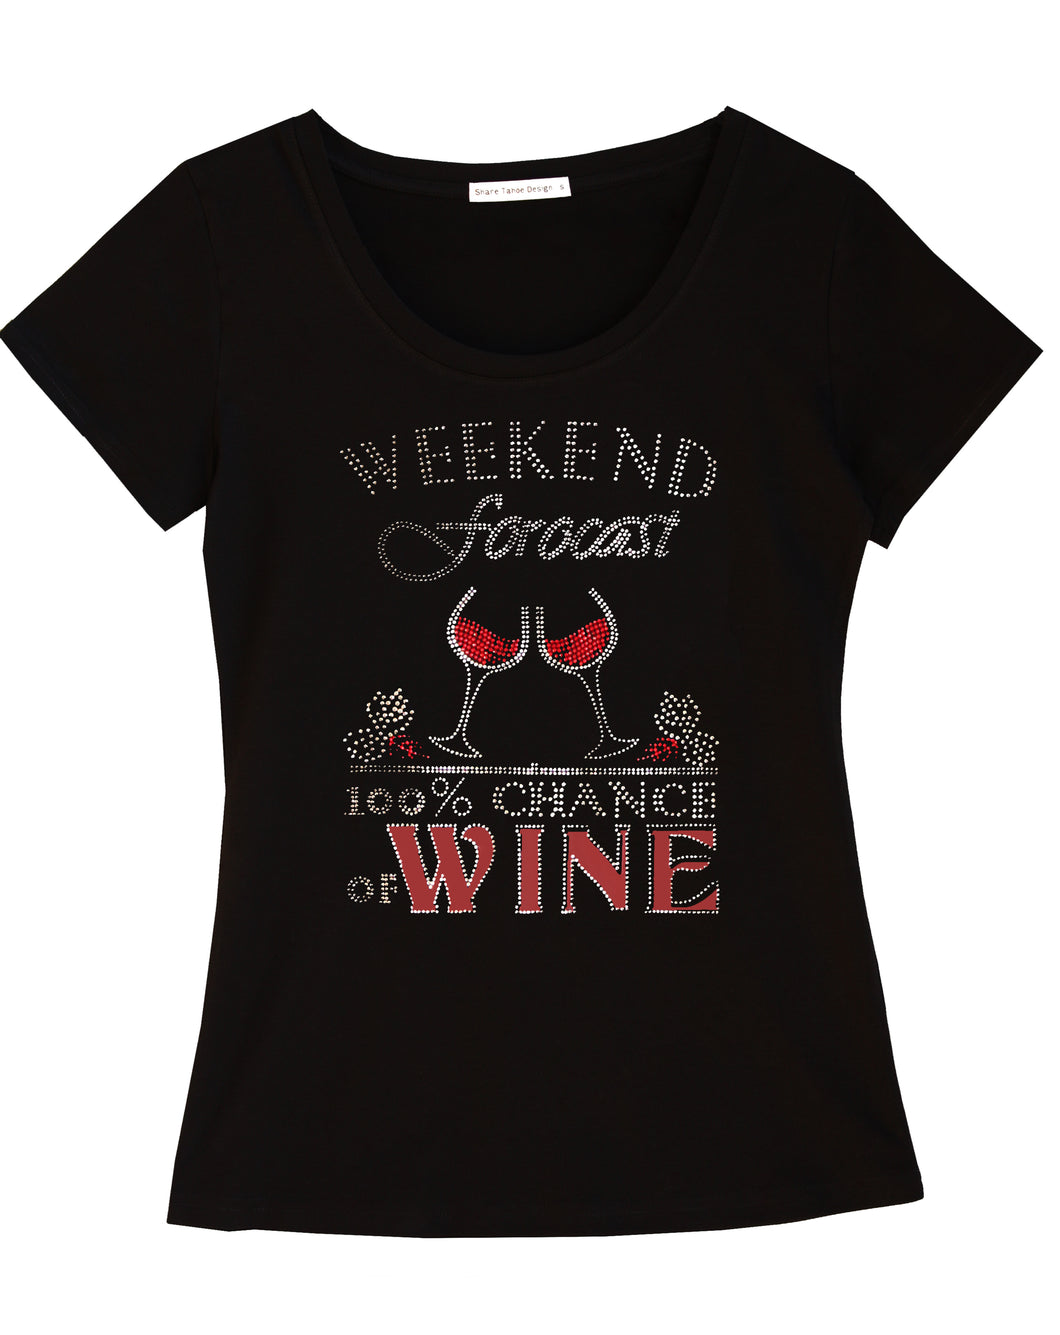 Weekend Forecast 100% Chance of Wine Fun Women T-shirt with Rhinestones For Wine Lovers